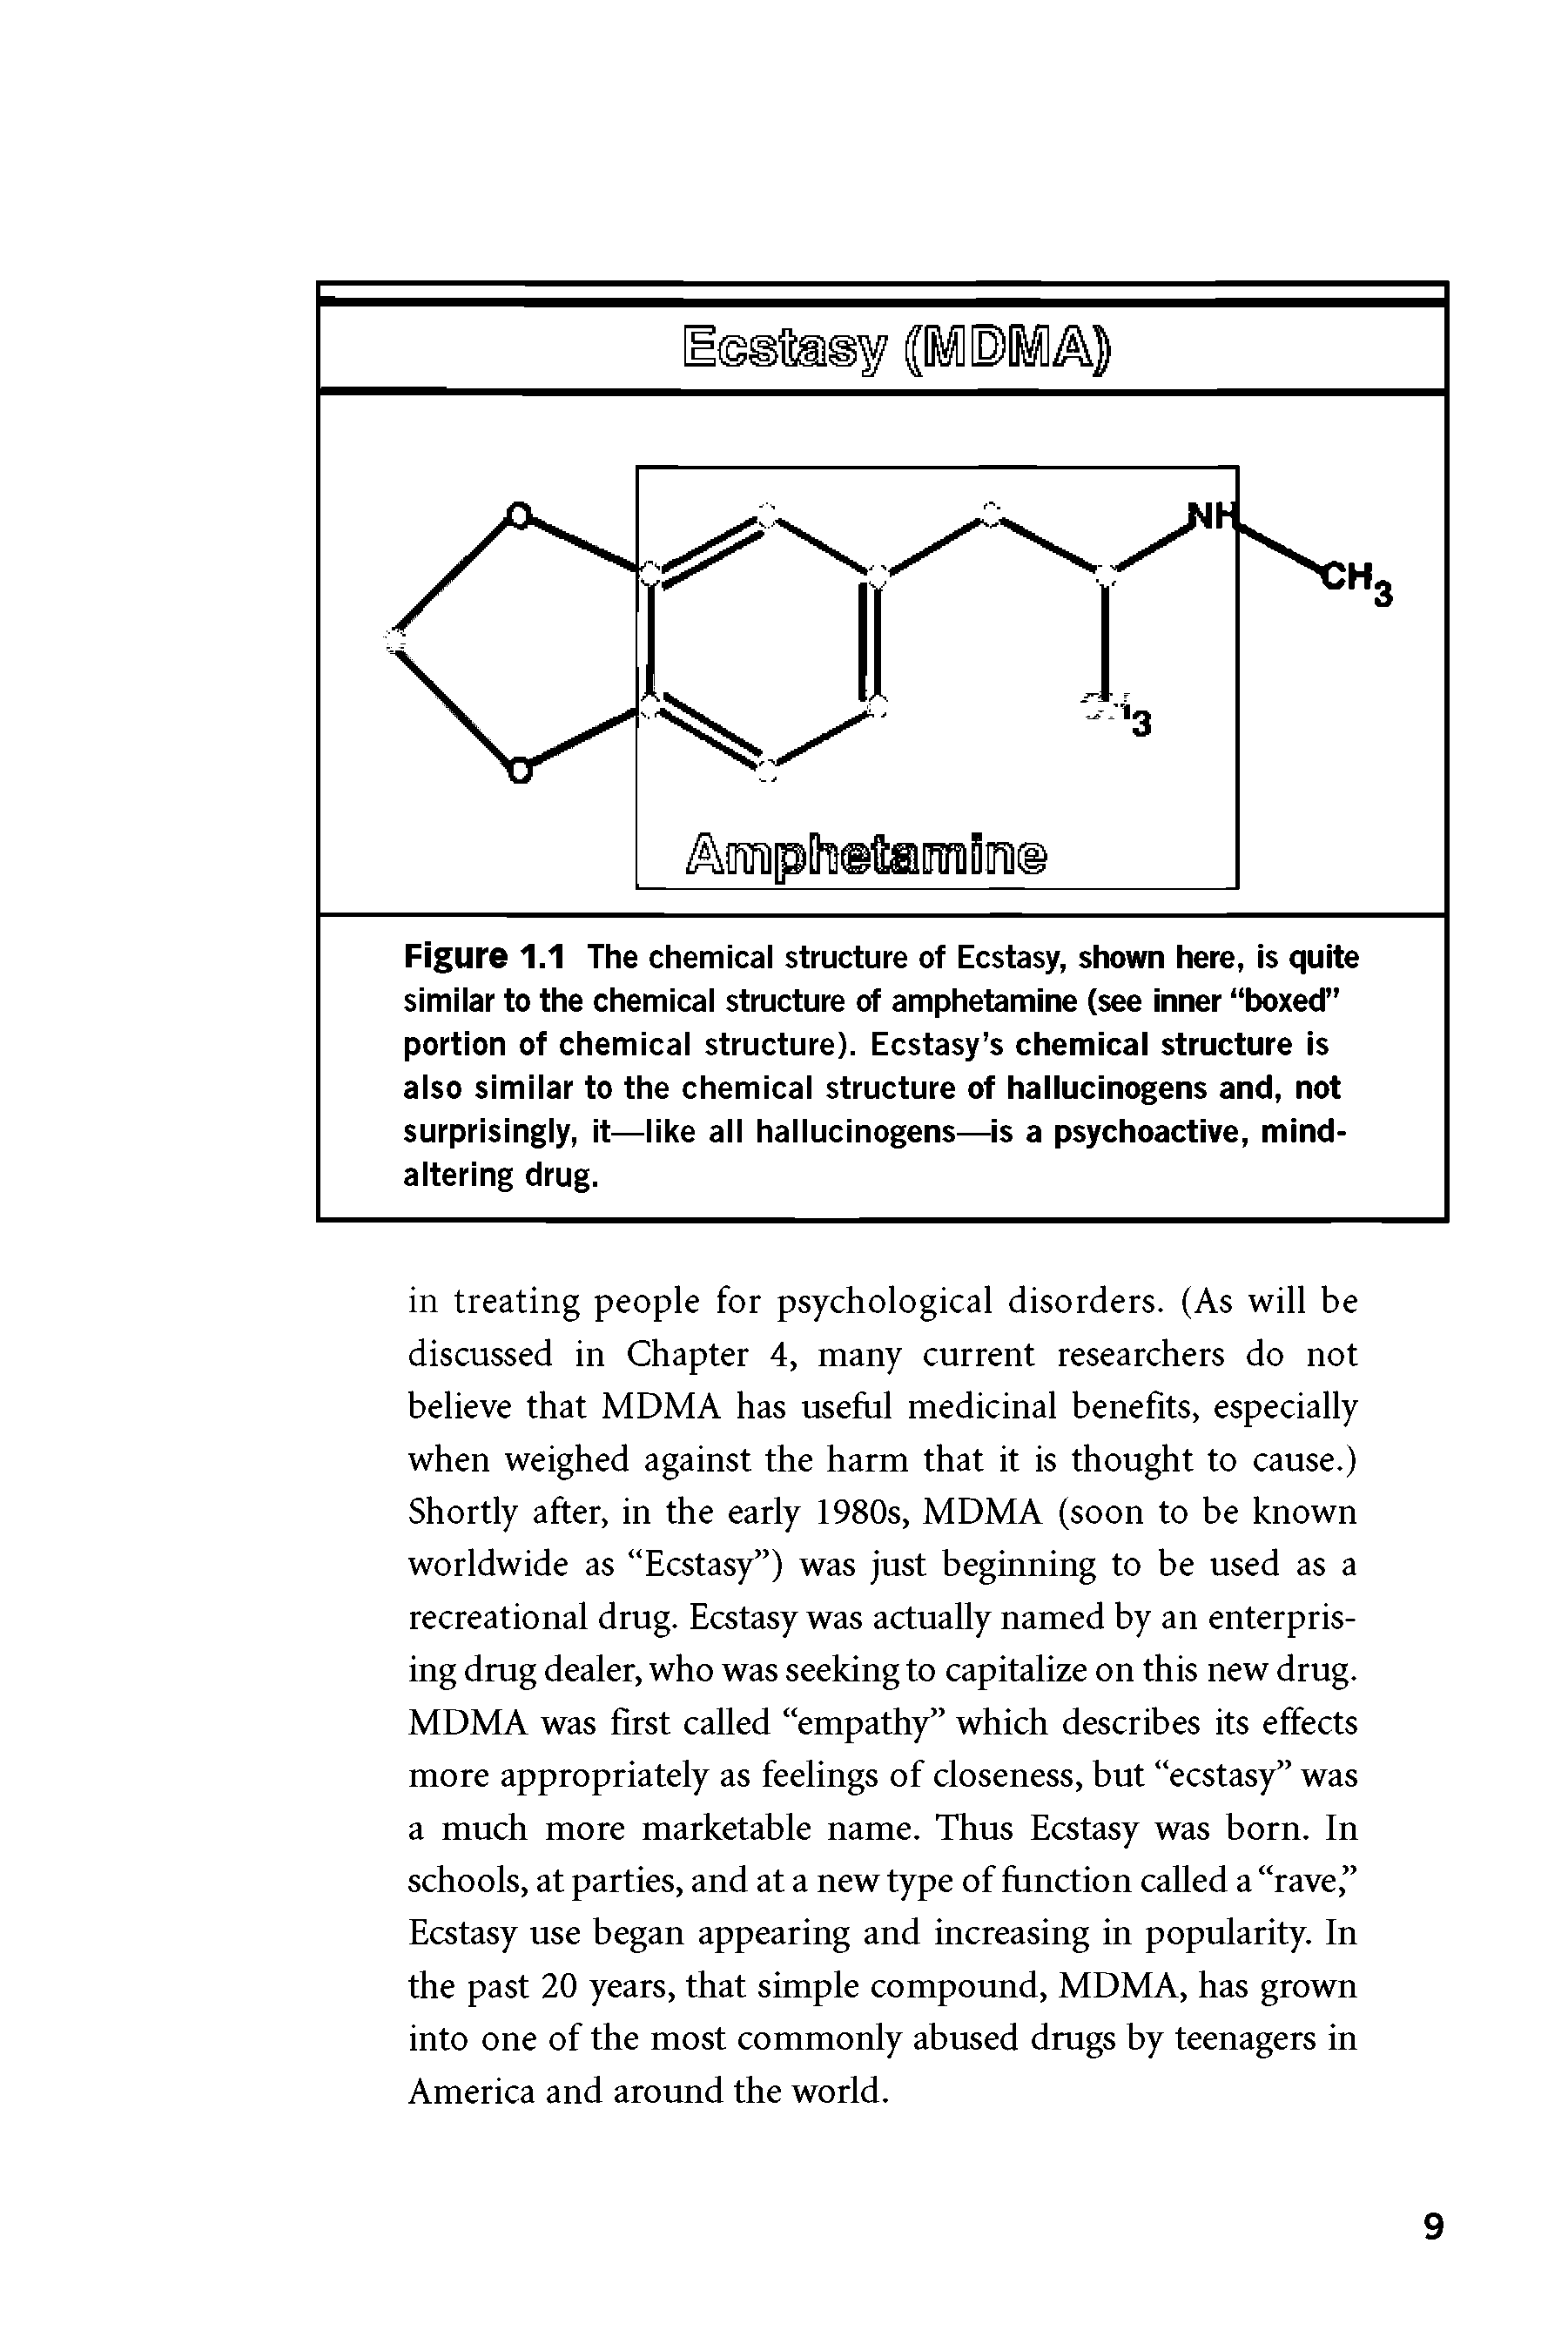 Figure 1.1 The chemical structure of Ecstasy, shown here, is quite similar to the chemical structure of amphetamine (see inner boxed portion of chemical structure). Ecstasy s chemical structure is also similar to the chemical structure of hallucinogens and, not surprisingly, it—like all hallucinogens—is a psychoactive, mind-altering drug.